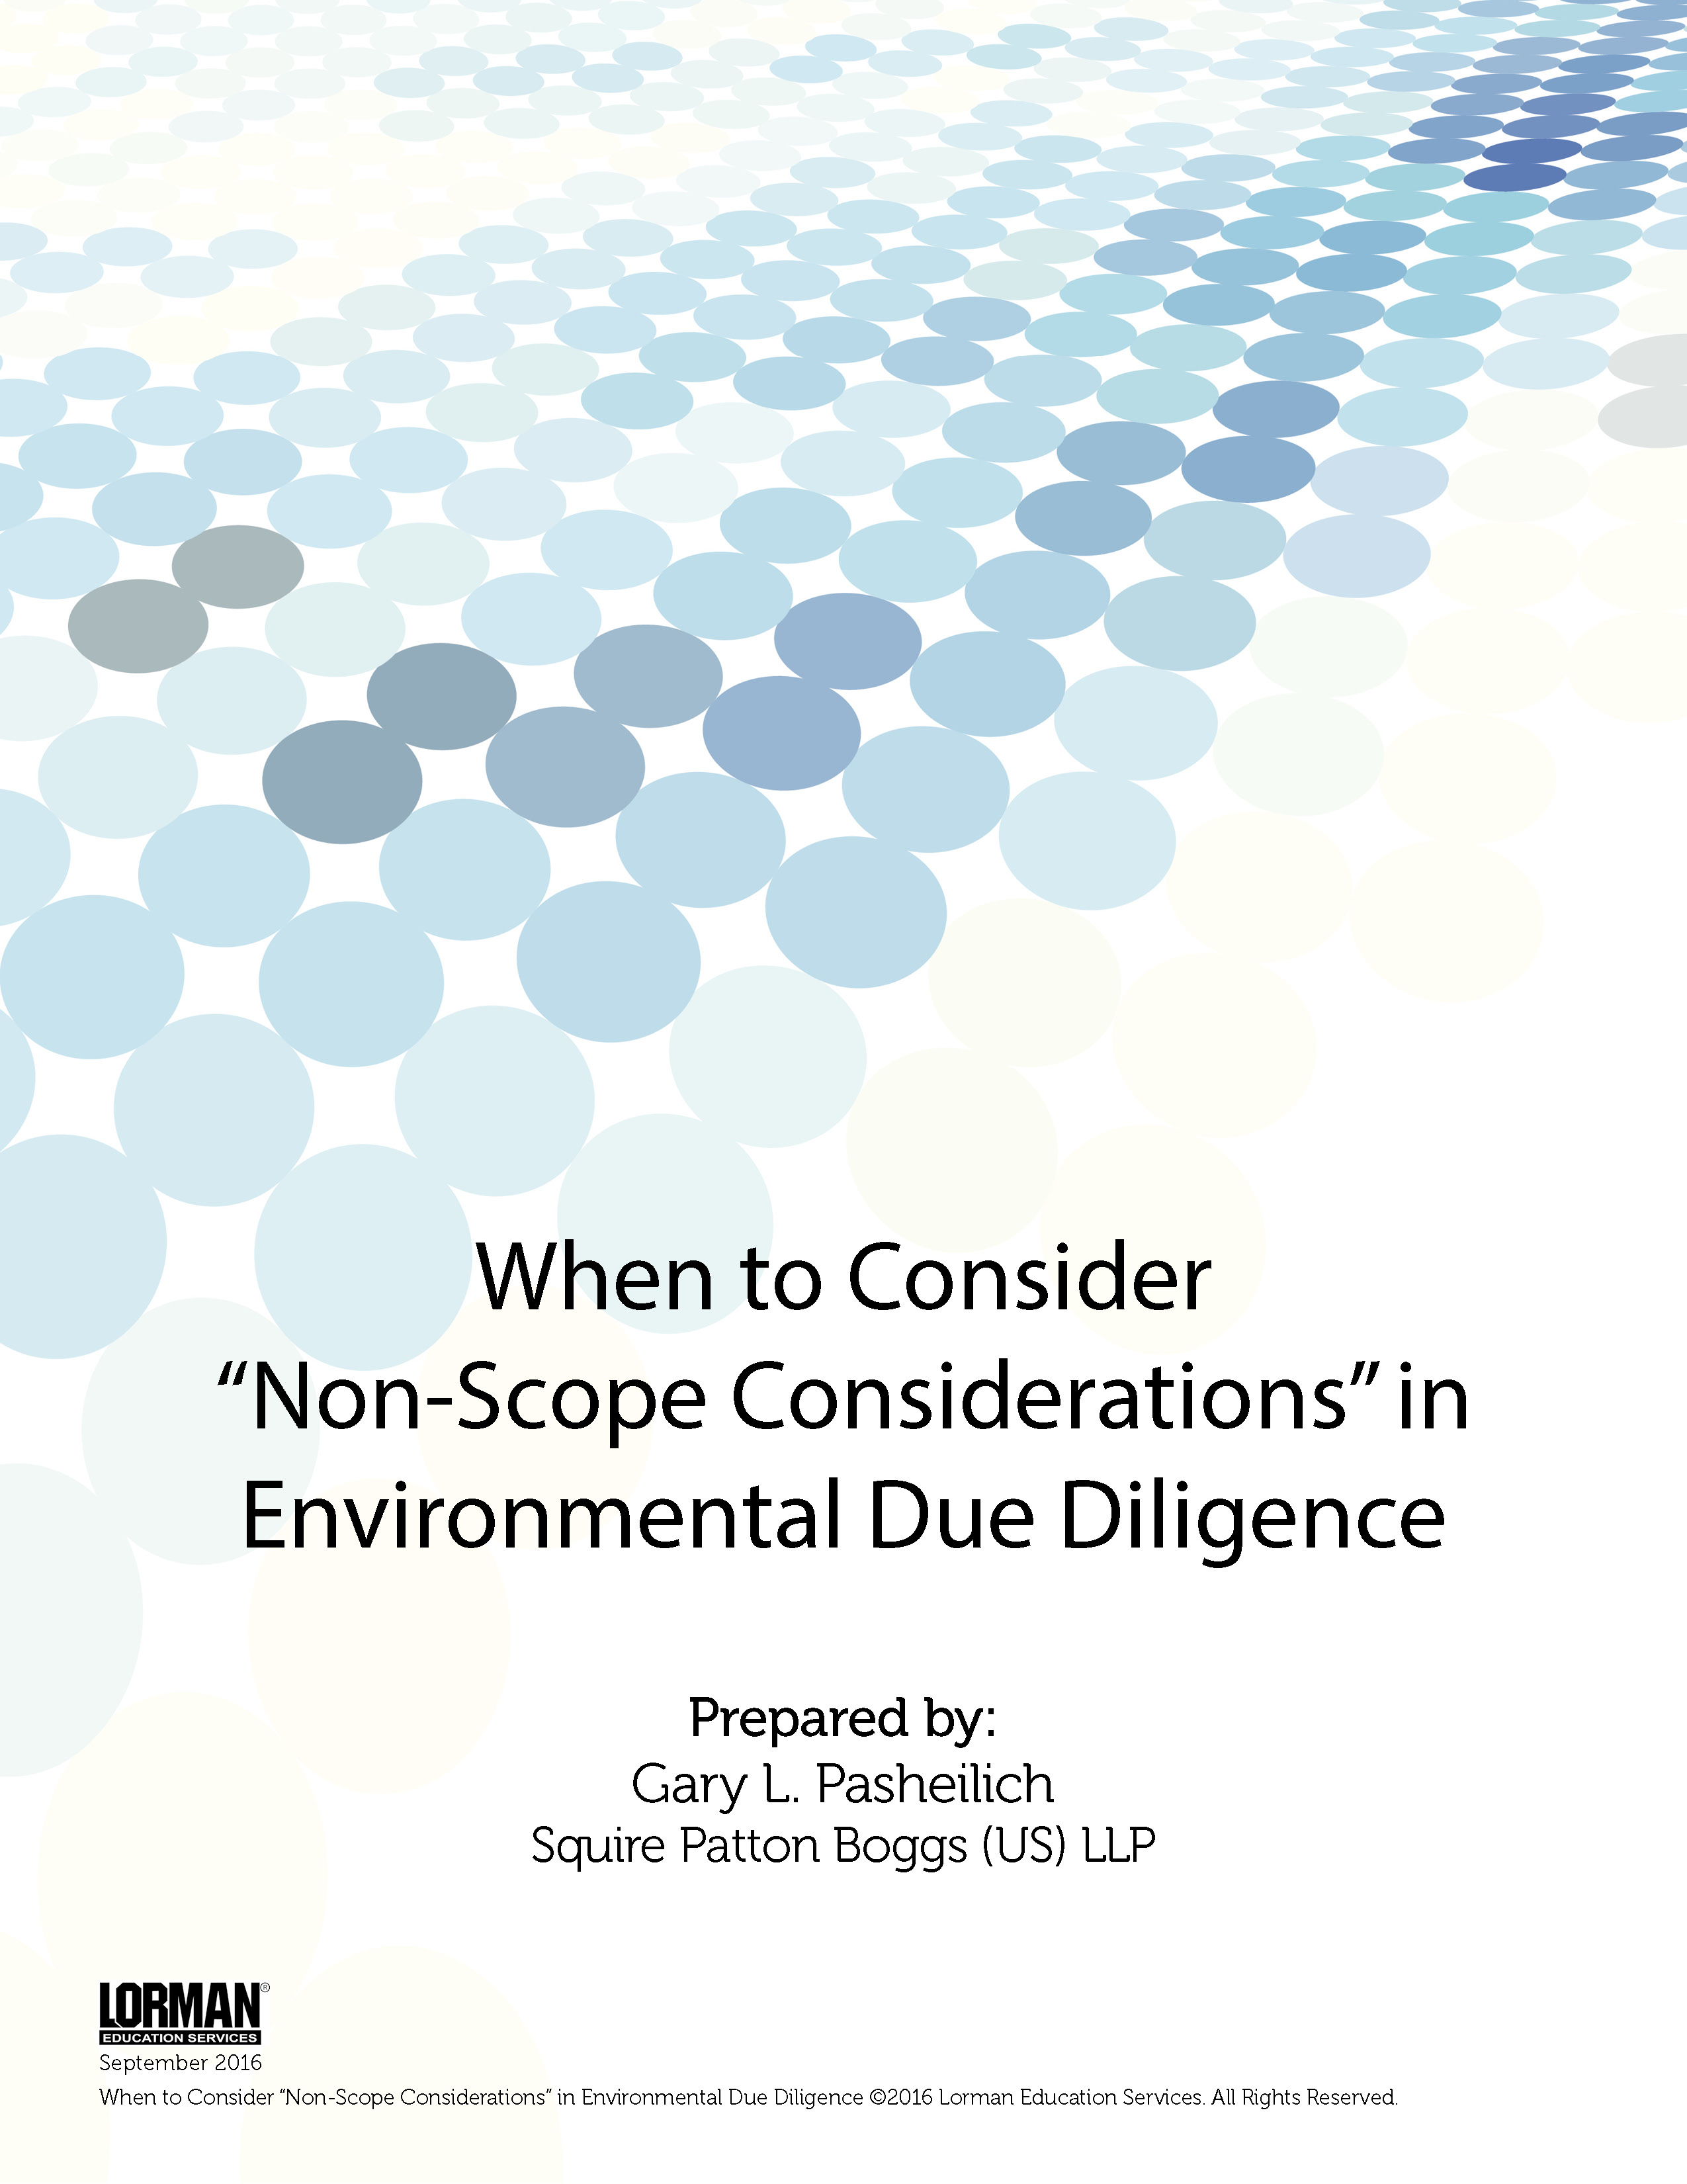 When to Consider “Non-Scope Considerations” in Environmental Due Diligence